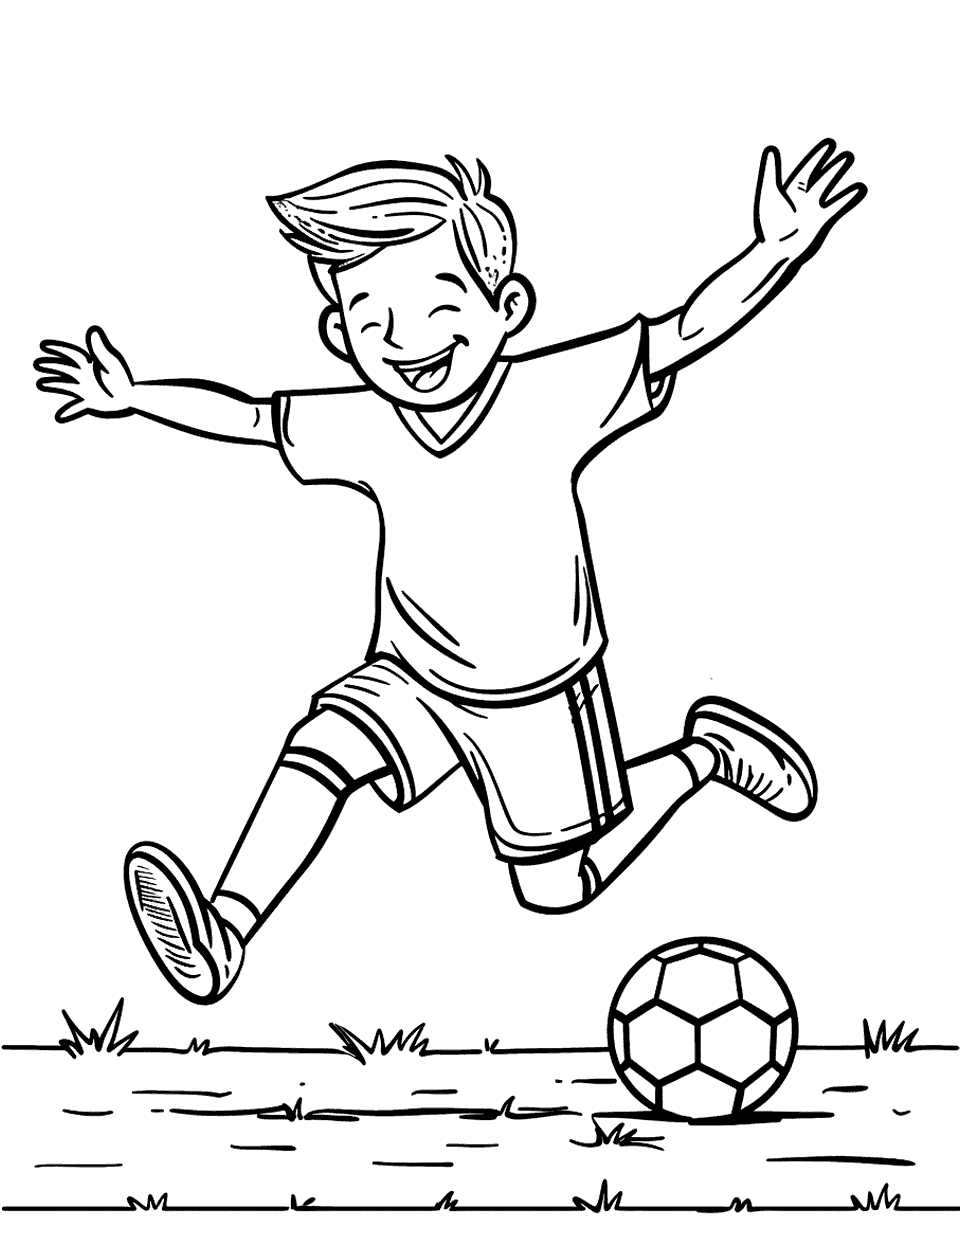 Youth Soccer Goal Celebration Coloring Page - A young player celebrating a goal by running with arms wide open, smiling broadly.